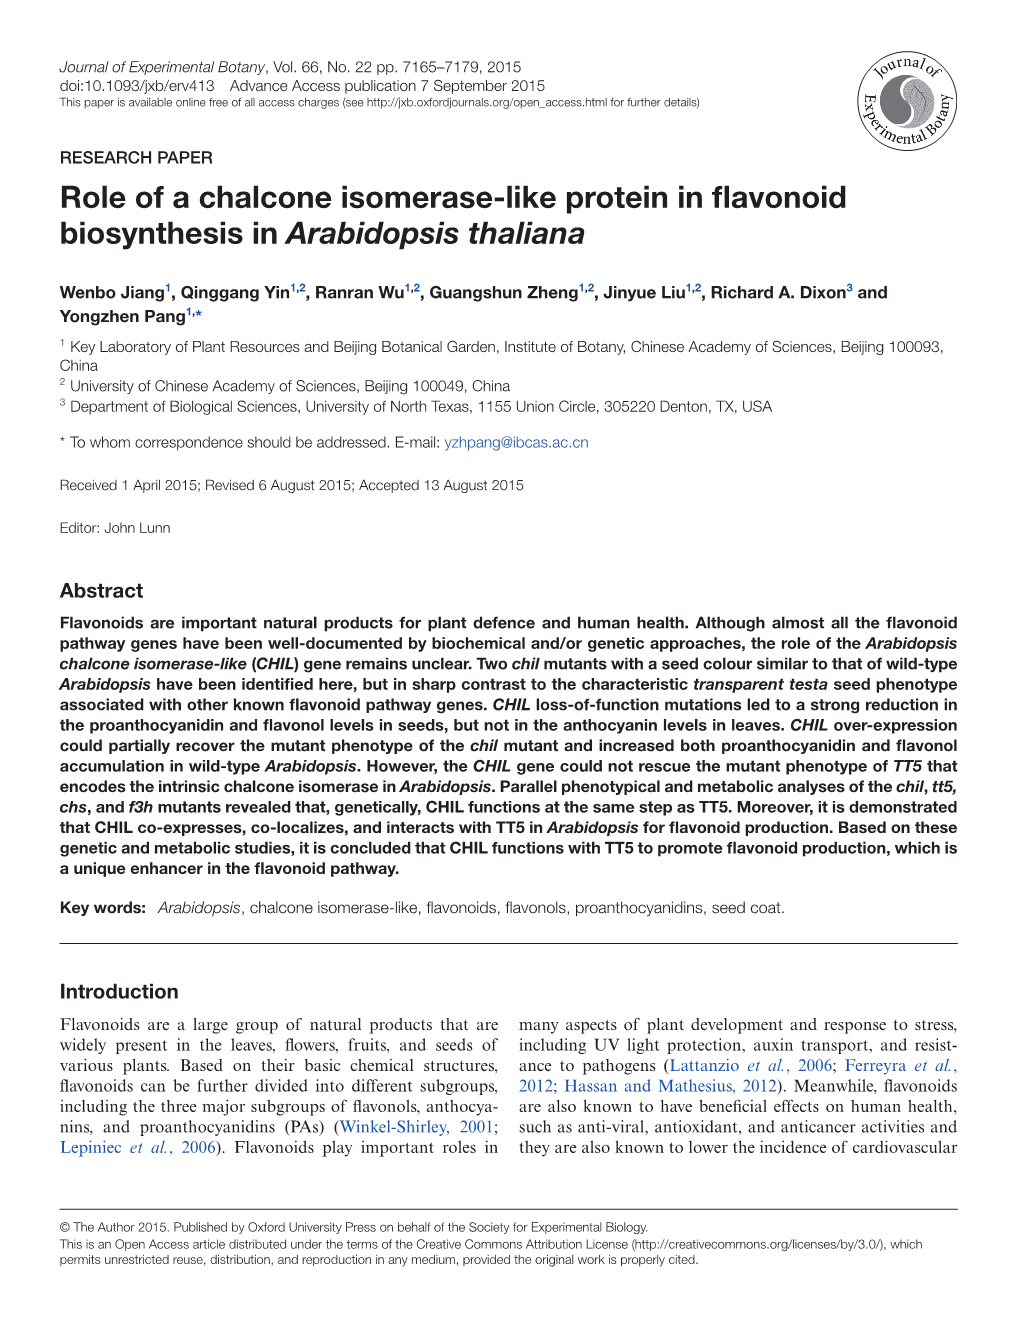 Role of a Chalcone Isomerase-Like Protein in Flavonoid Biosynthesis in Arabidopsis Thaliana